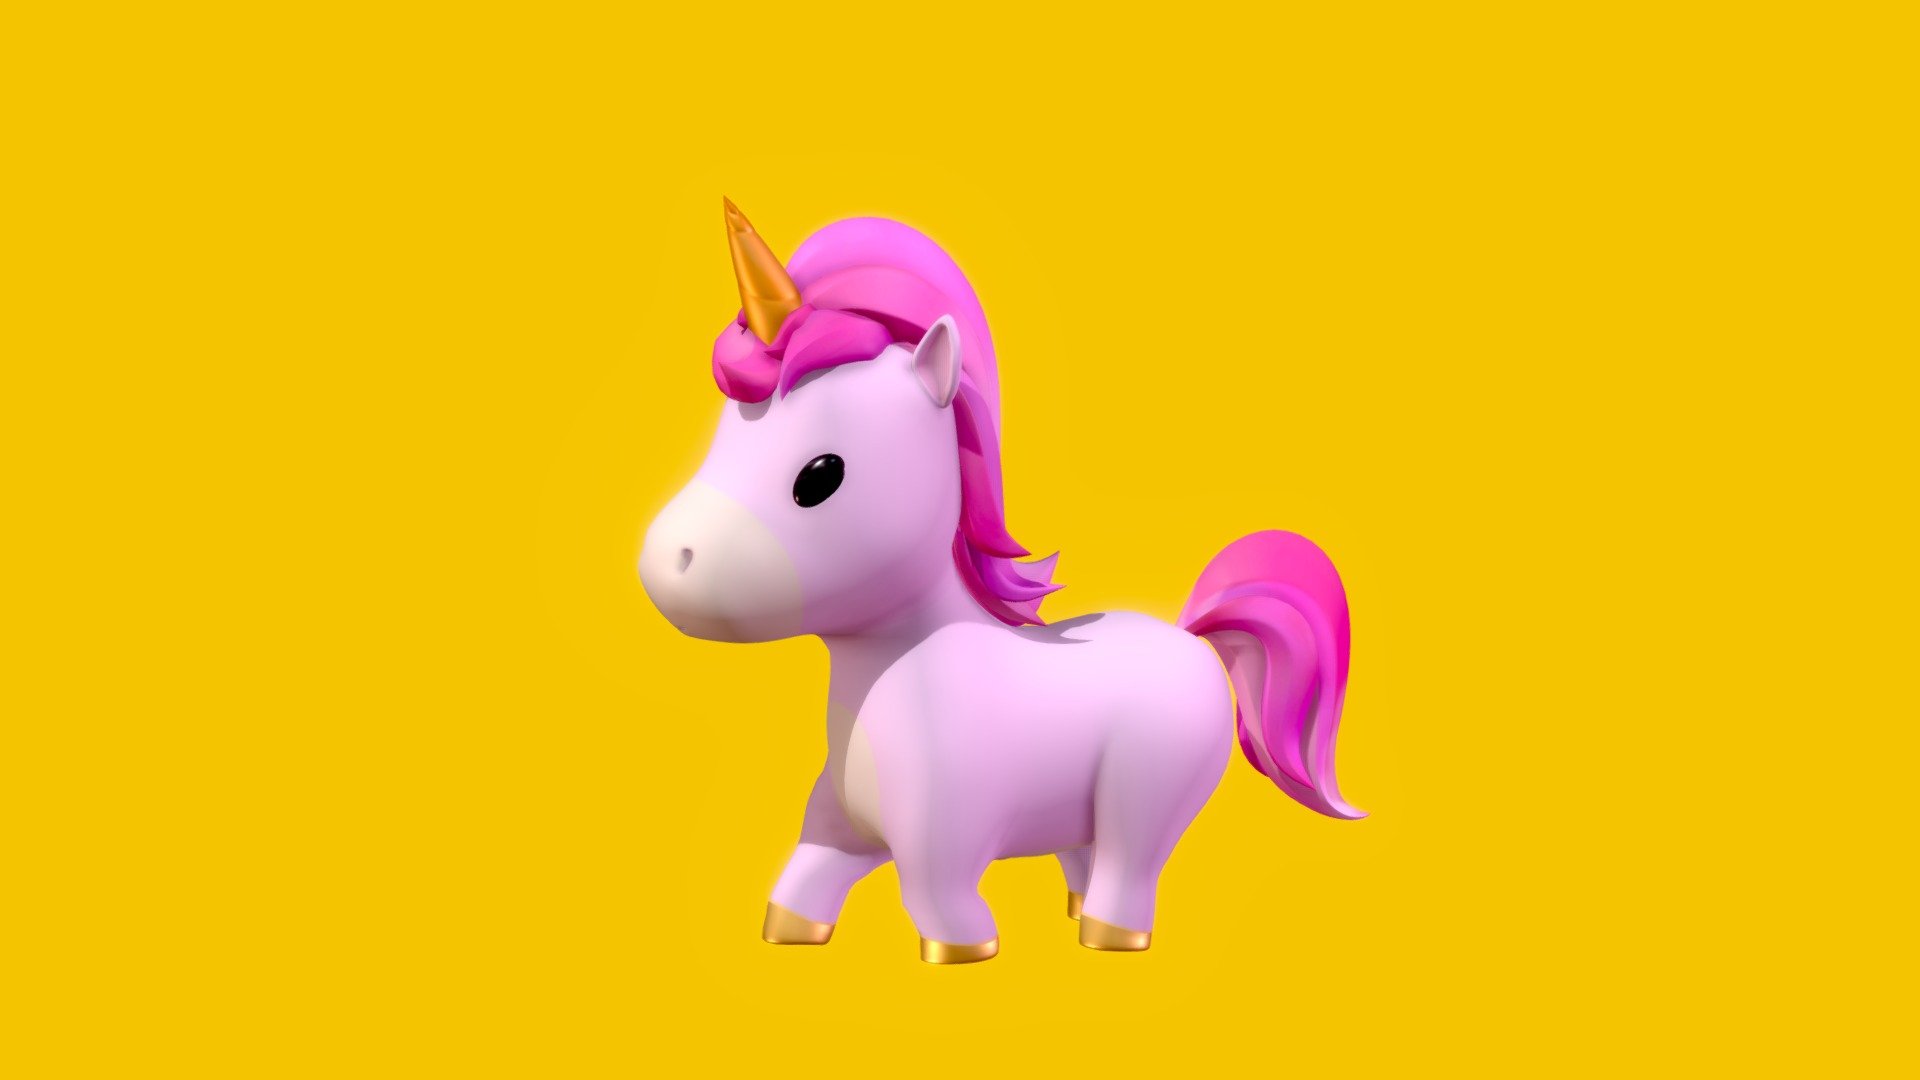 Just a model of tiny Unicorn! (+ animation).
Modeled in Blender.

Instagram: @nottodayrender - Just a Unicorn! - 3D model by nottodayrender 3d model